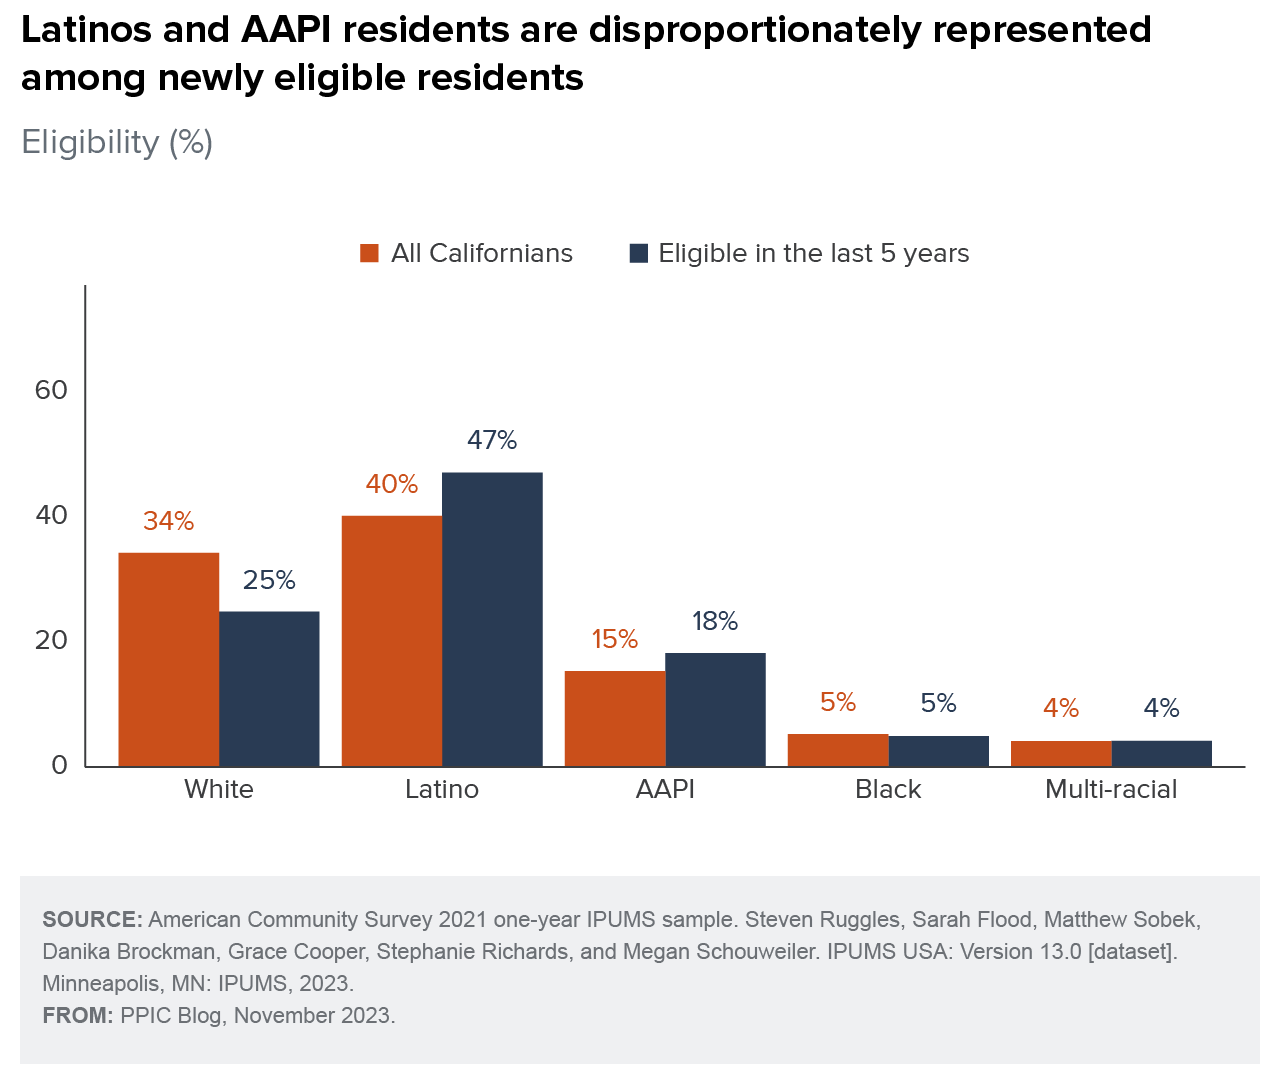 figure - Latinos and AAPI residents are disproportionately represented among newly eligible residents